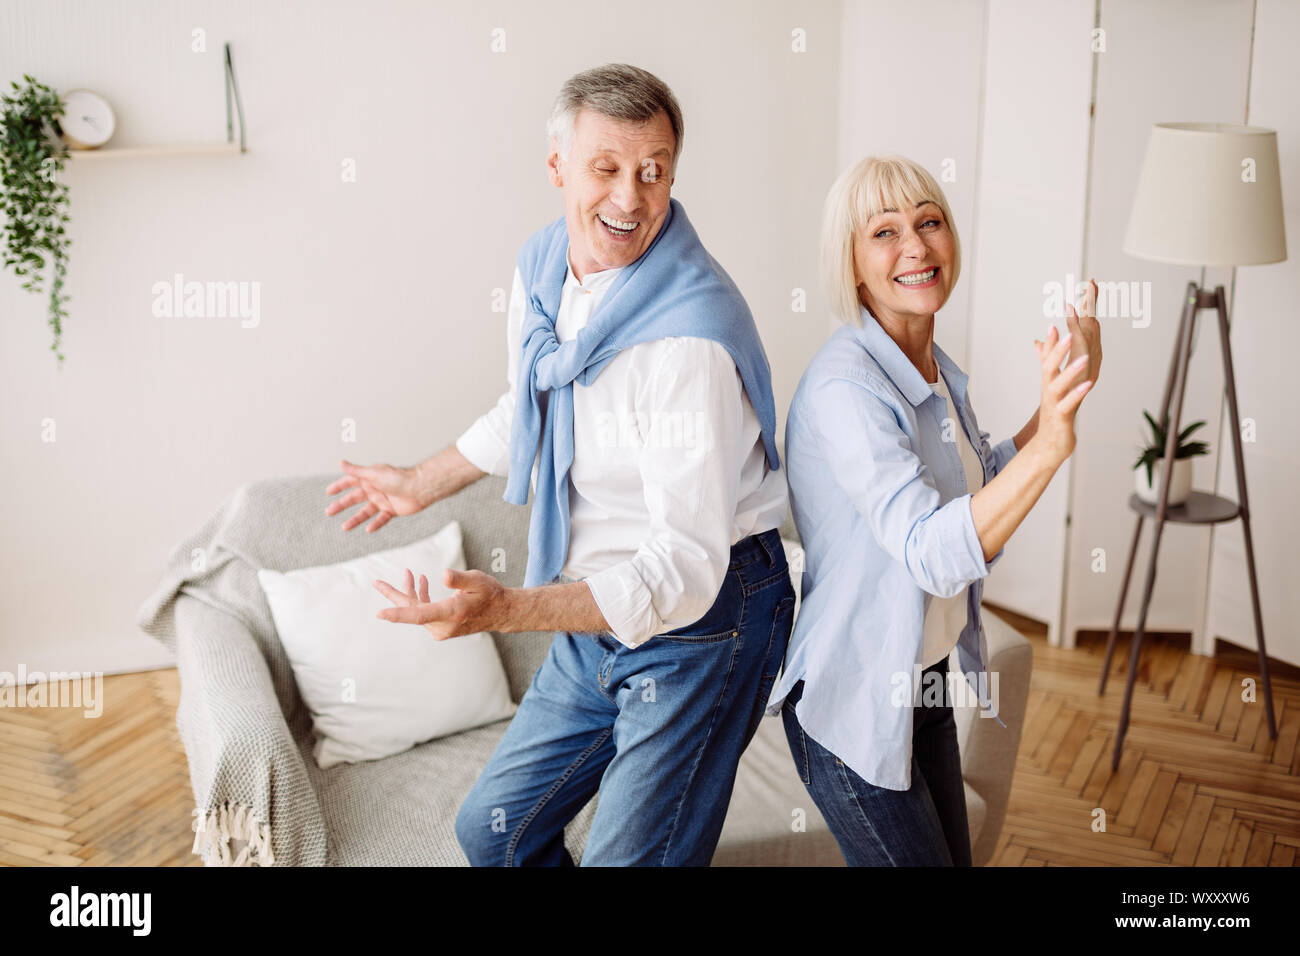 Senior couple dancing active dance at home Stock Photo